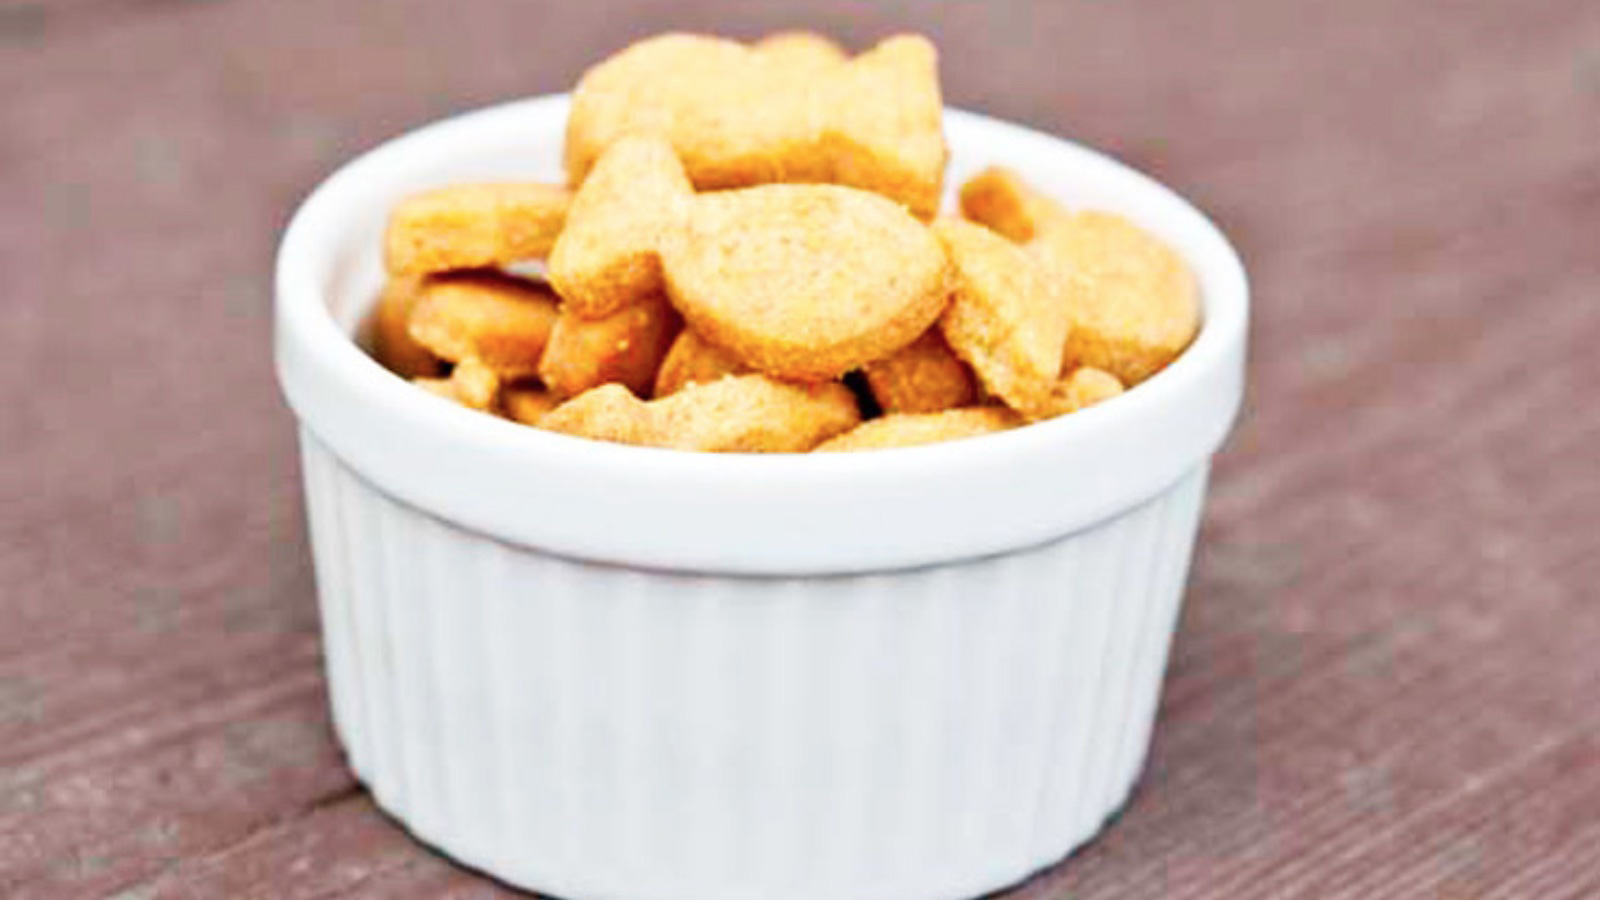 <p>You are going to love these homemade<a href="https://www.thegraciouspantry.com/clean-eating-goldfish-crackers/"> goldfish crackers</a>. They are cheesy and delicious and so much better for you than the store-bought version. They are perfect for snacking and there’s no refrigeration required. </p>